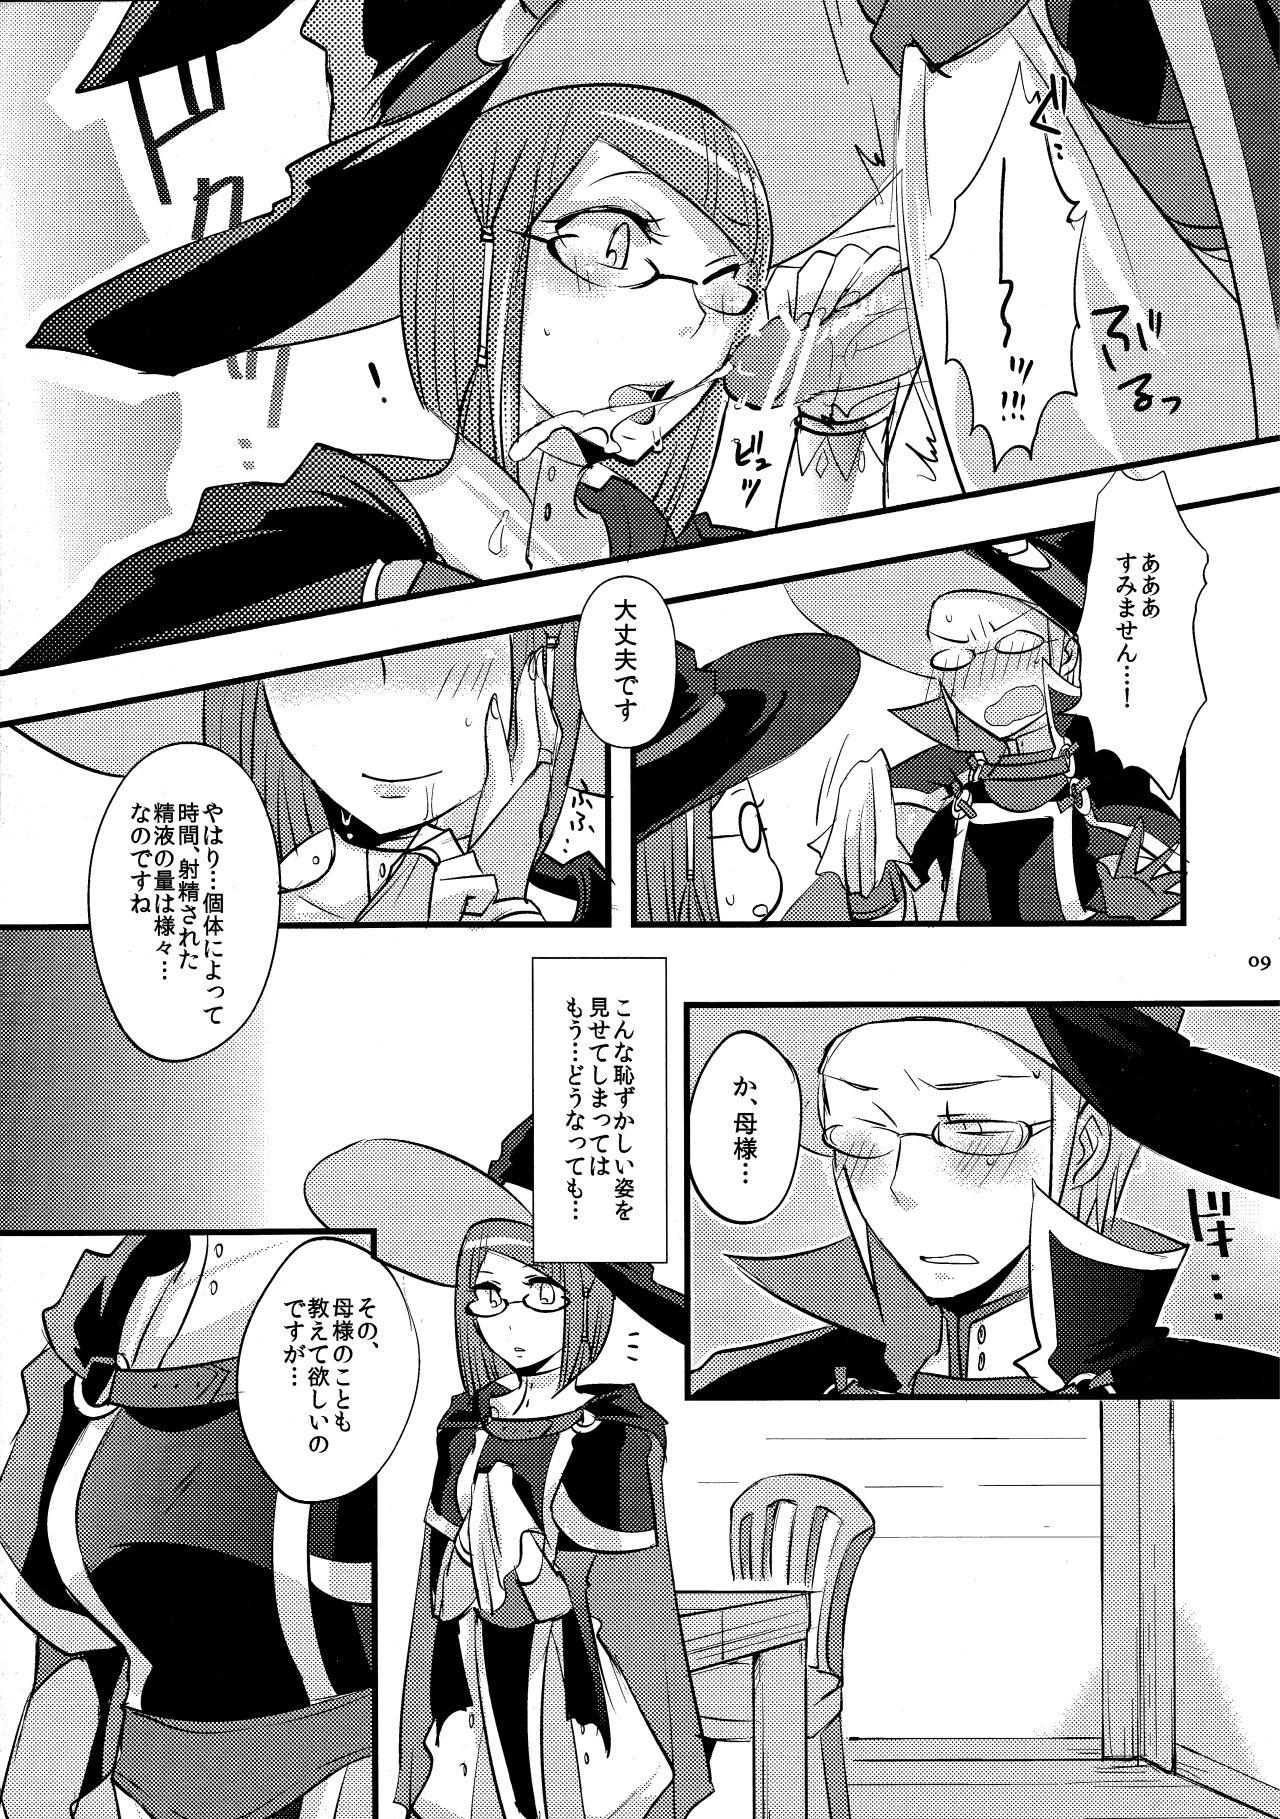 Perfect Butt Maza☆Con - Fire emblem awakening Free Oral Sex - Page 8